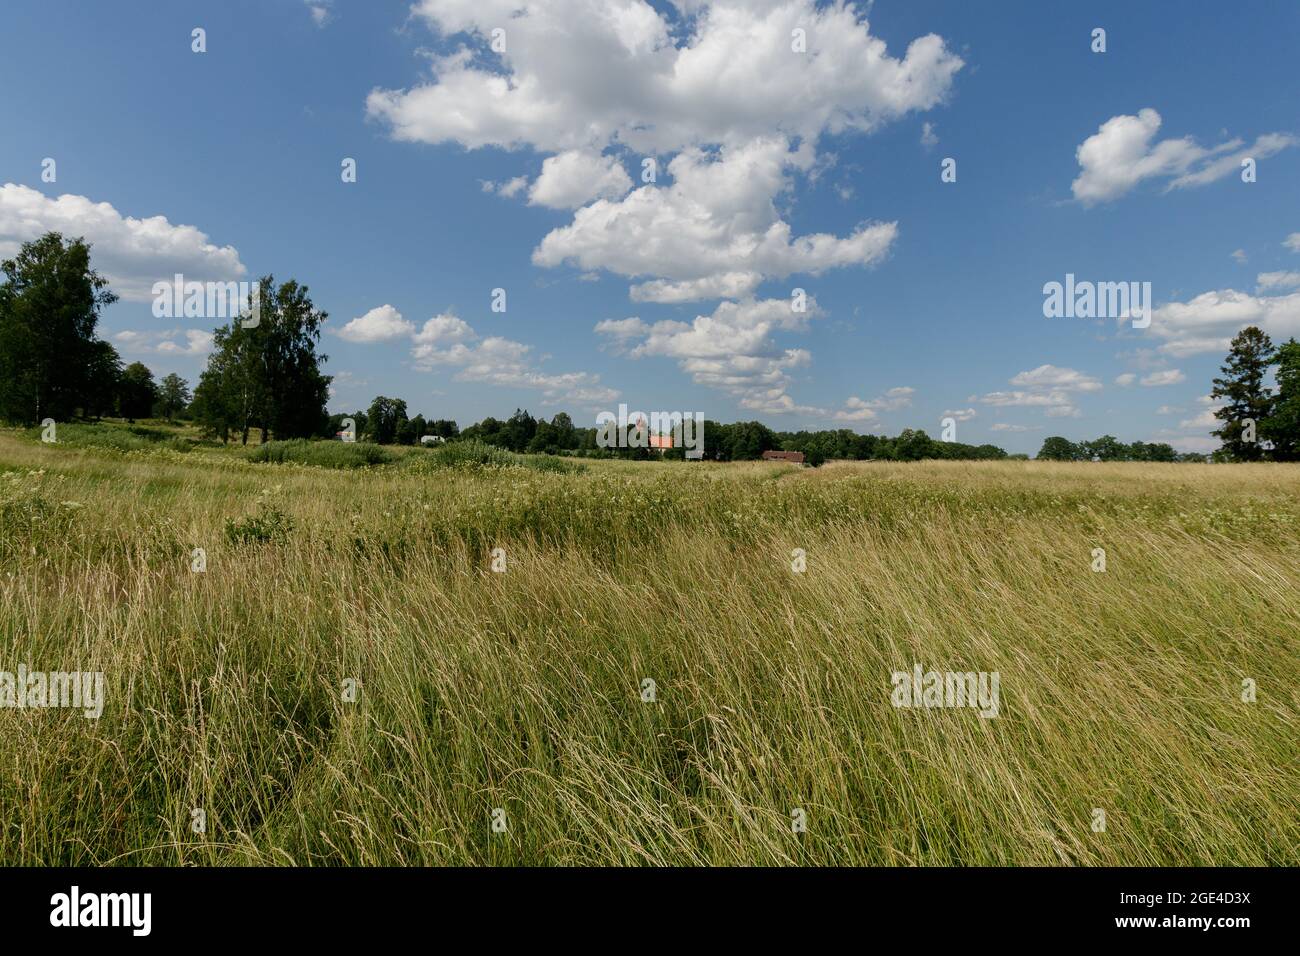 A huge, green overgrown meadow in the countryside on a very hot summer day. The wind blows bent grass and flowers. White clouds flow in the blue sky. Stock Photo